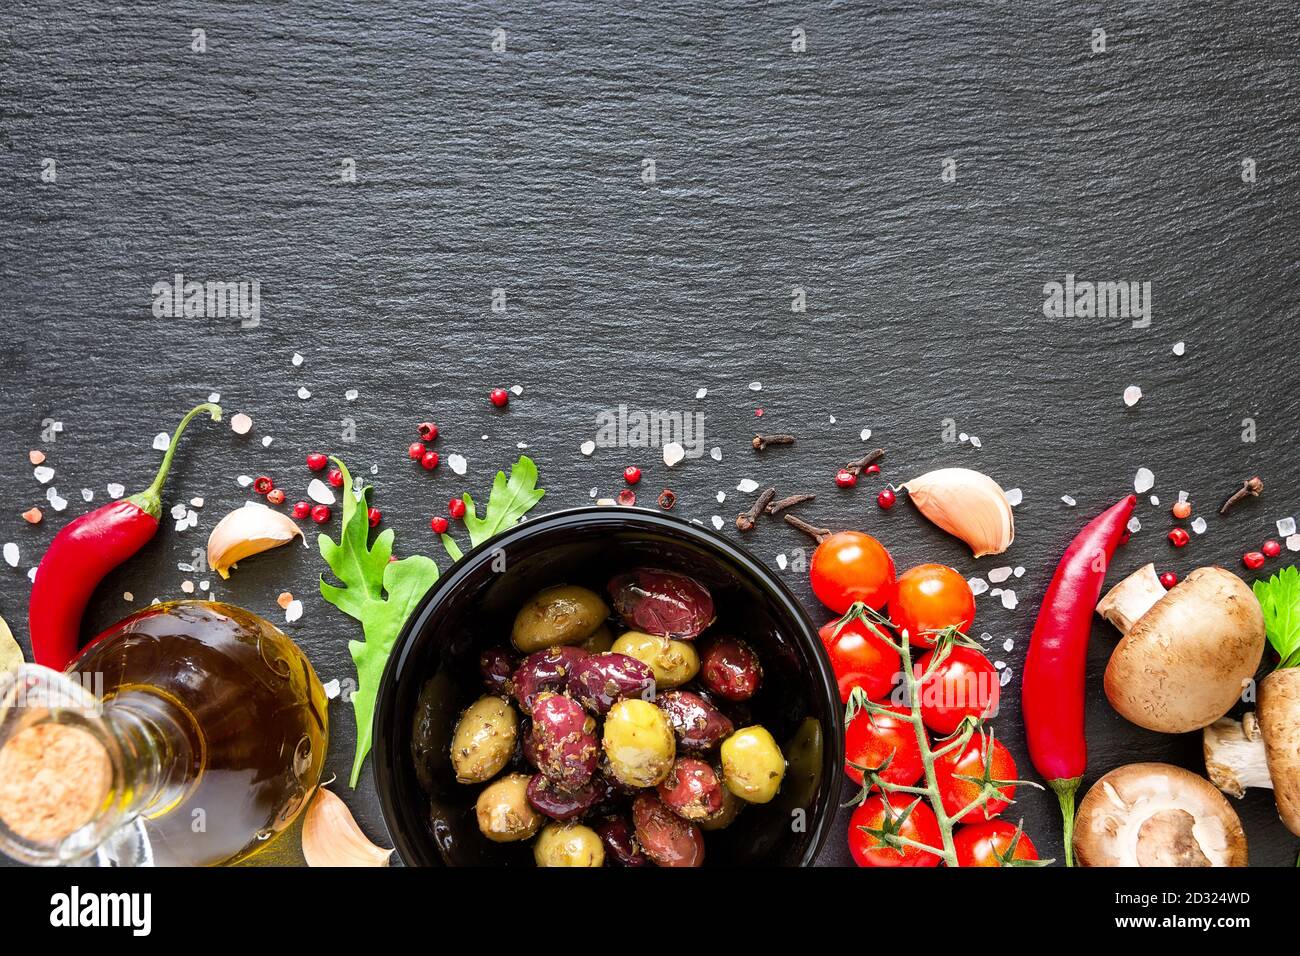 Food ingredients on dark background. Tomatoes, spices, garlic, mushrooms and basil leaves on black background. Vegetarian food, health or cooking conc Stock Photo